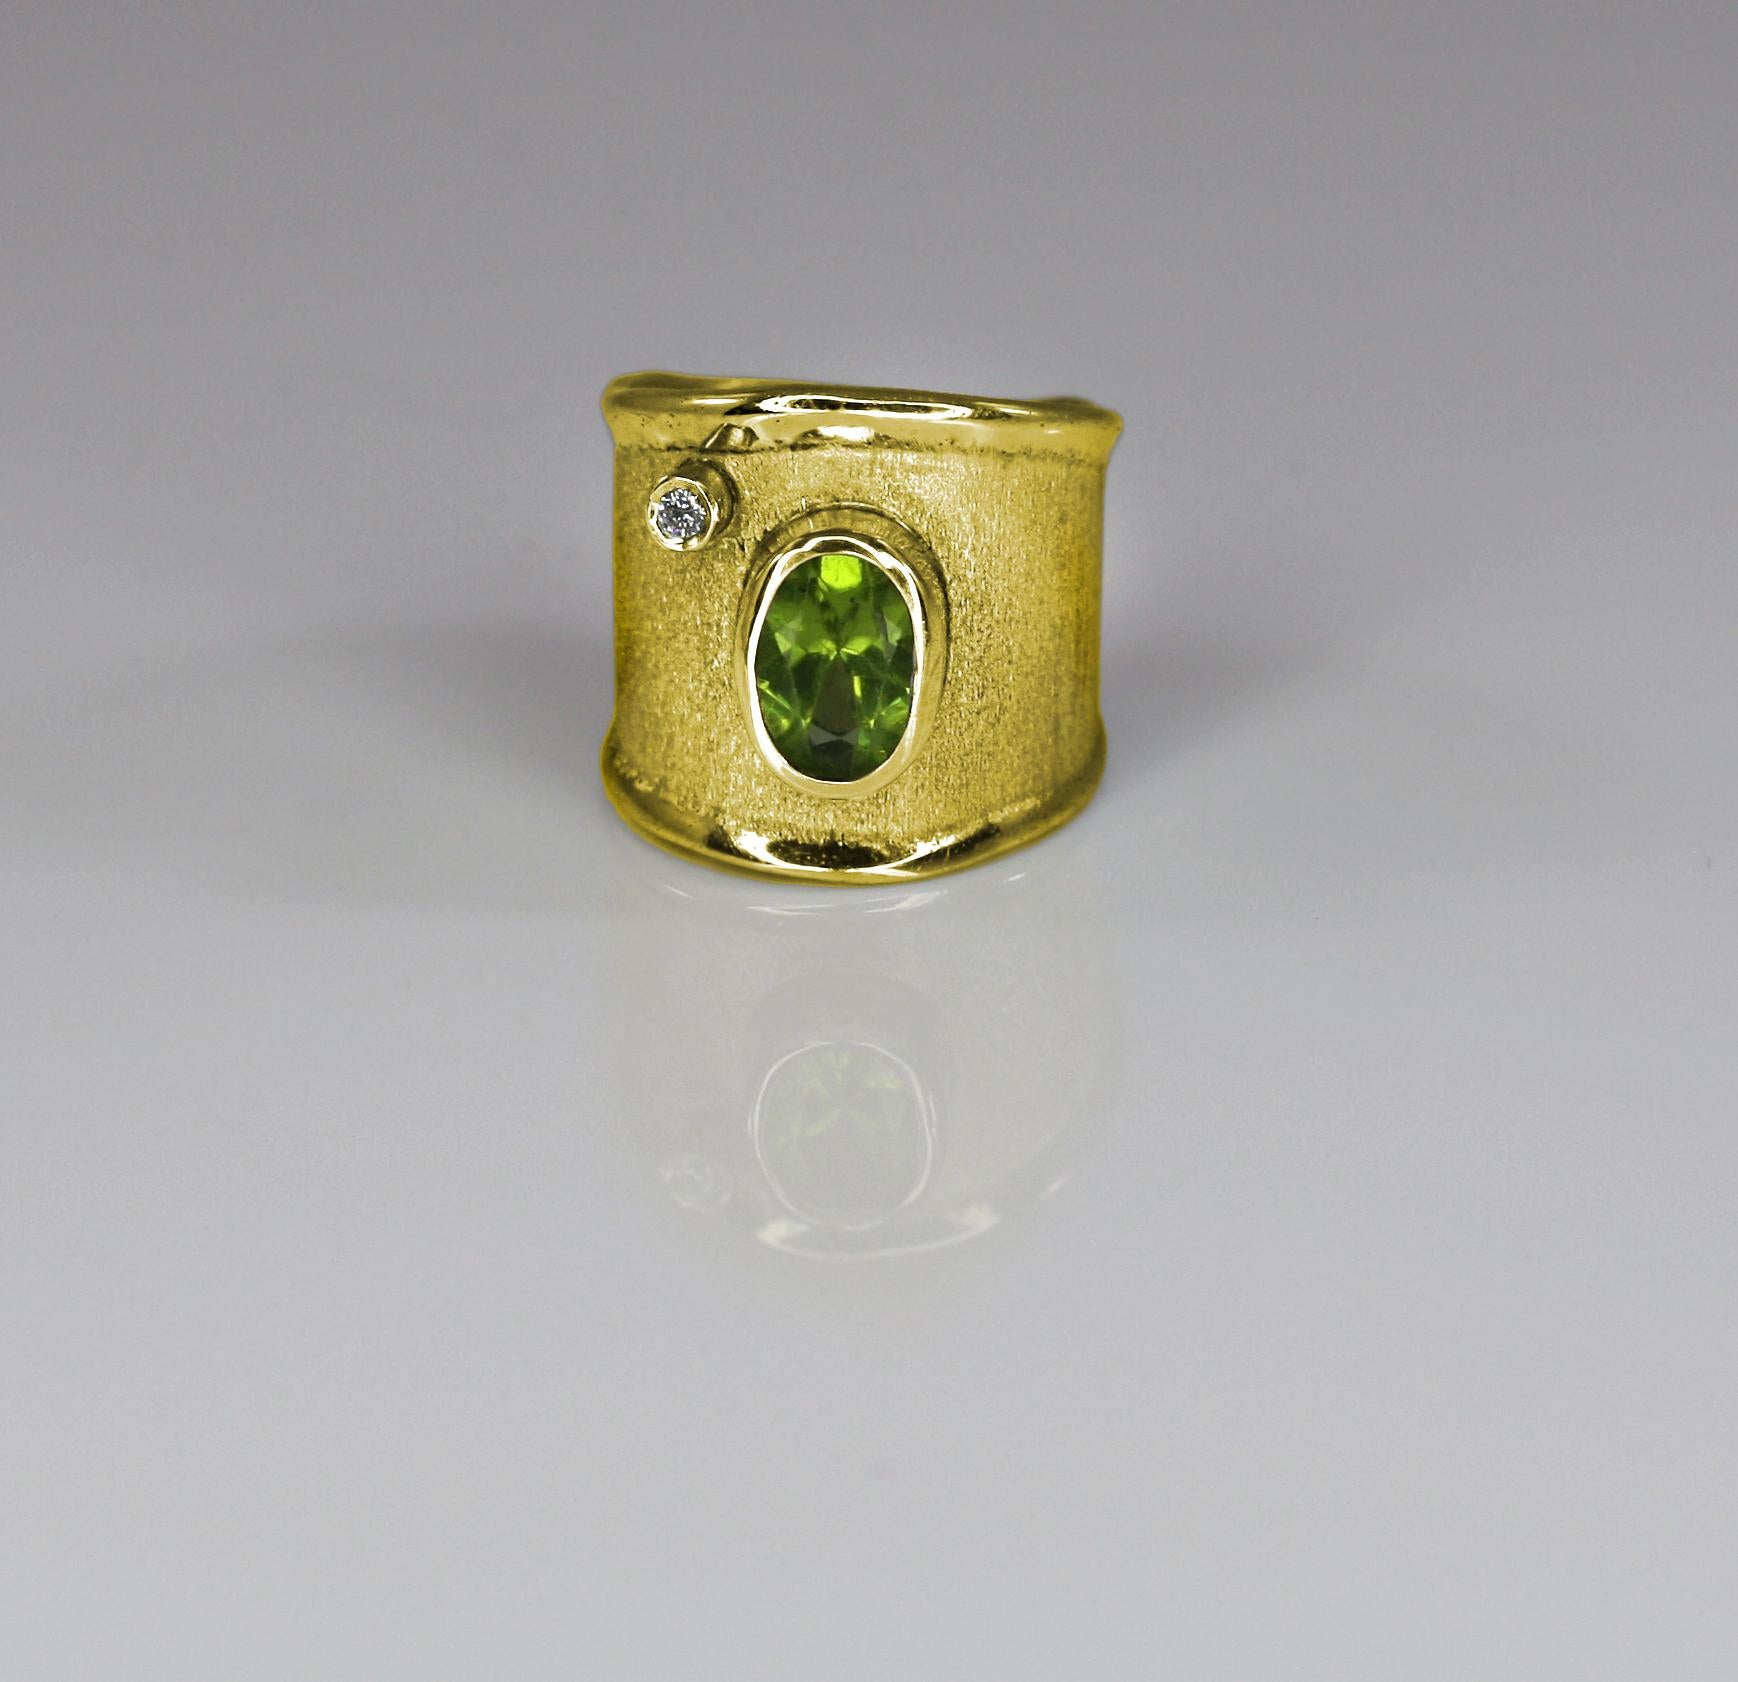 Yianni Creations presents a handmade artisan ring all crafted from 18 Karat Gold. The ring features 2.00 Carat Peridot and 0.03 Carat brilliant cut Diamond contrasting on the brushed background. The unique look is created by ancient techniques of